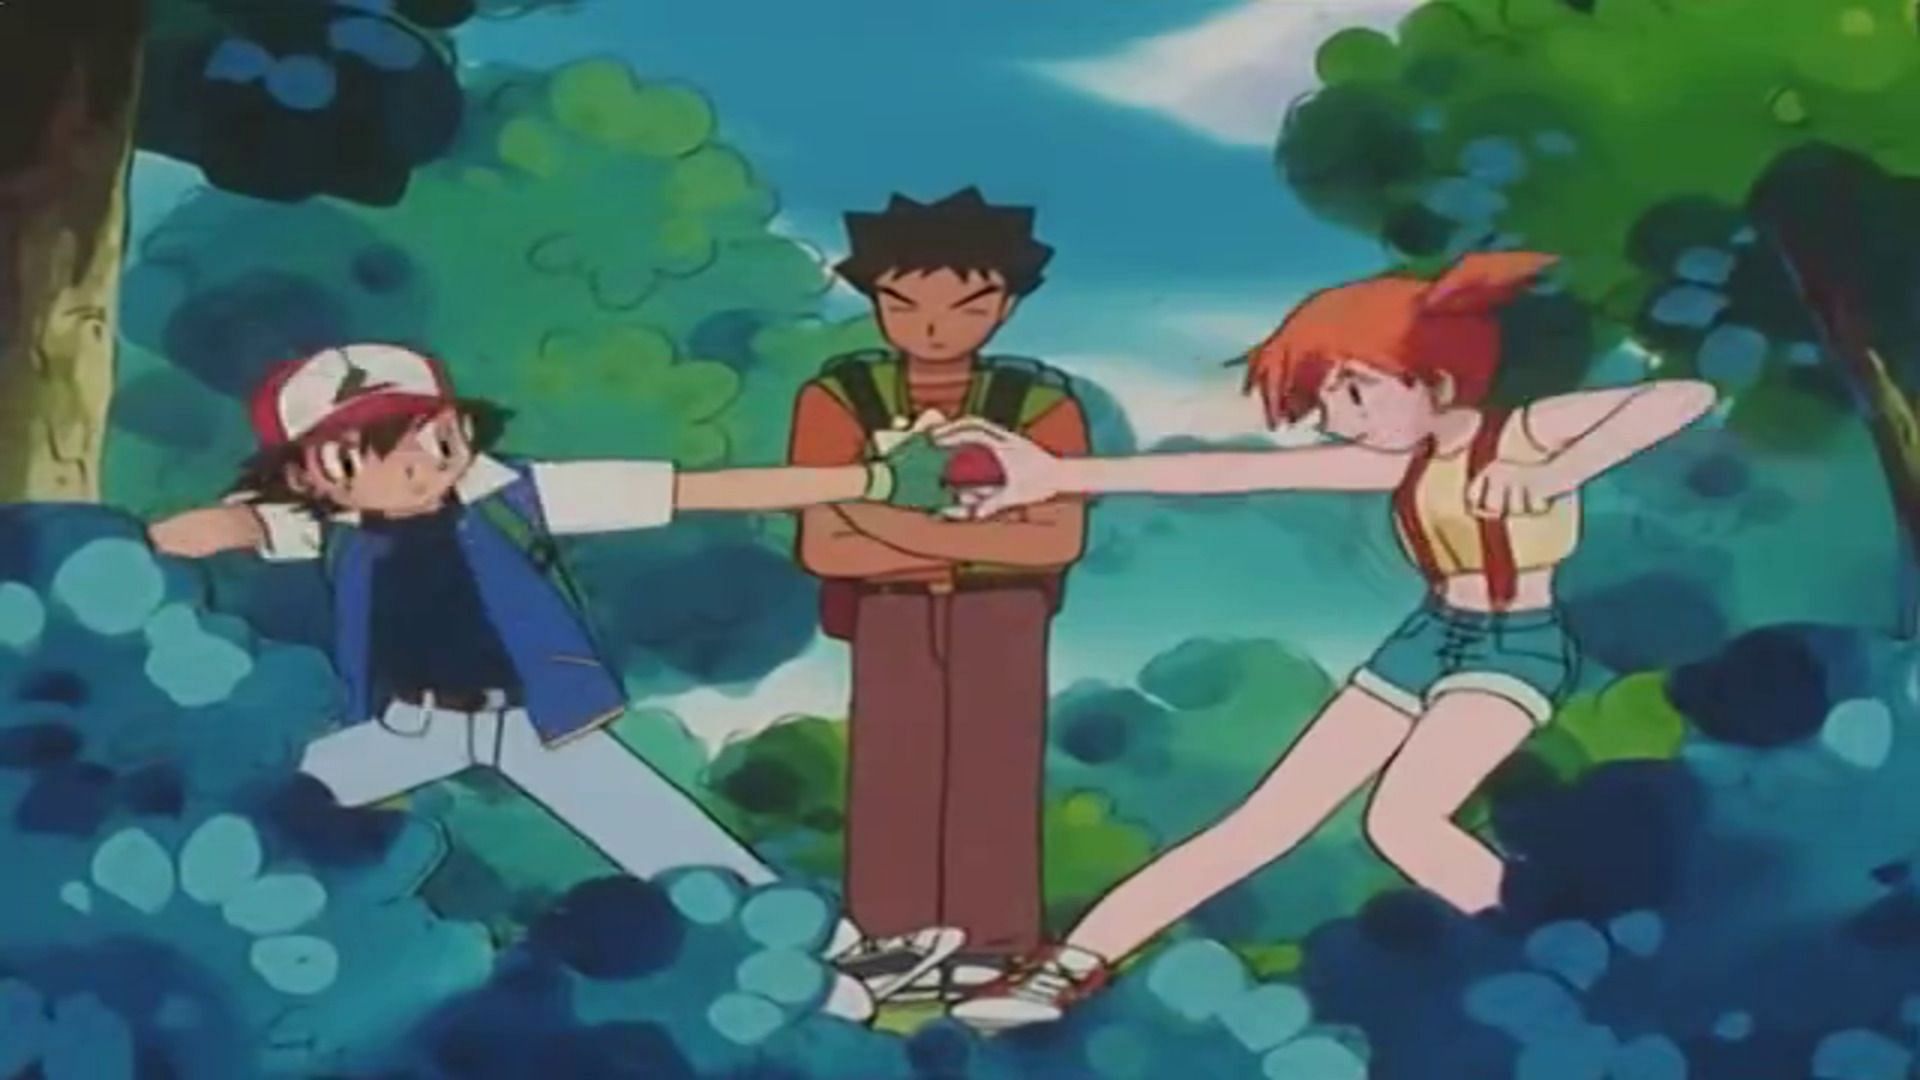 In this episode, Ash and Misty share a battle, Ash catches a Totodile, and Misty&#039;s Poliwag evolves (Image via The Pokemon Company)